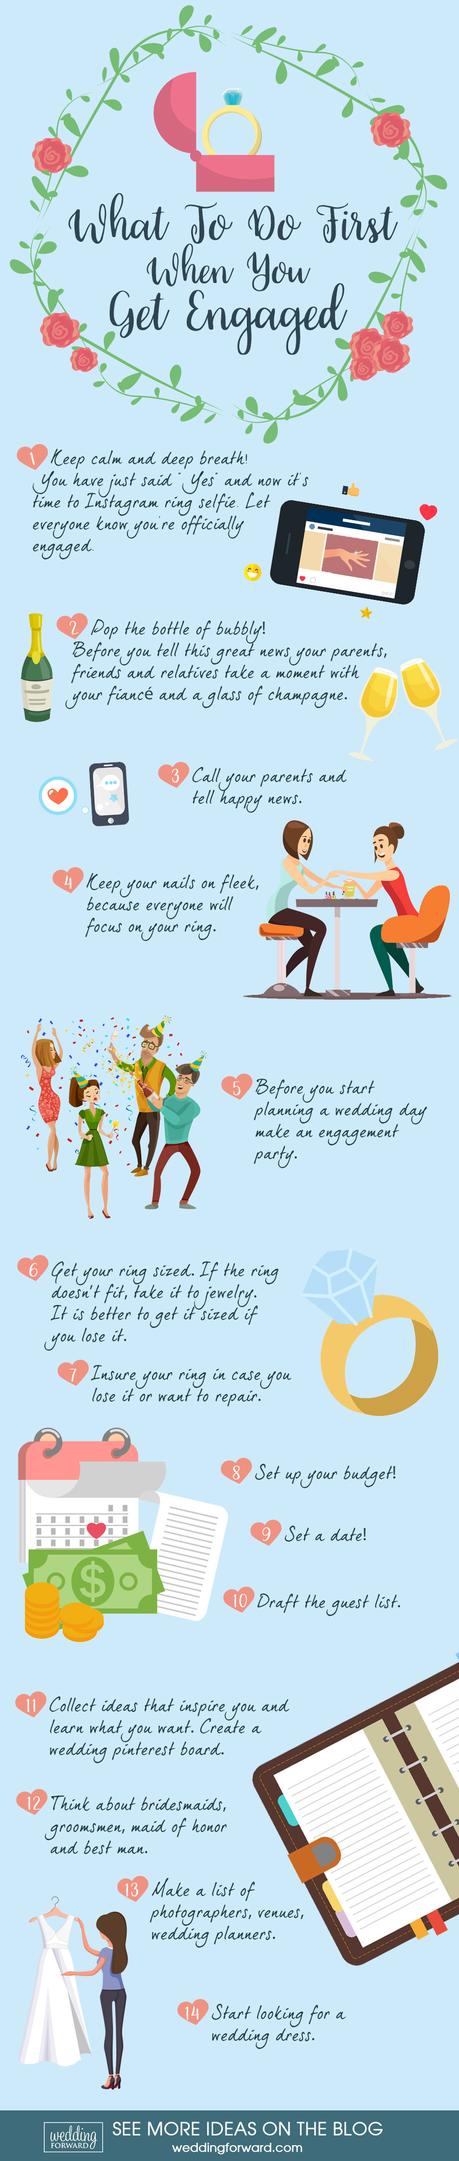 infographic what to do first when you get engaged